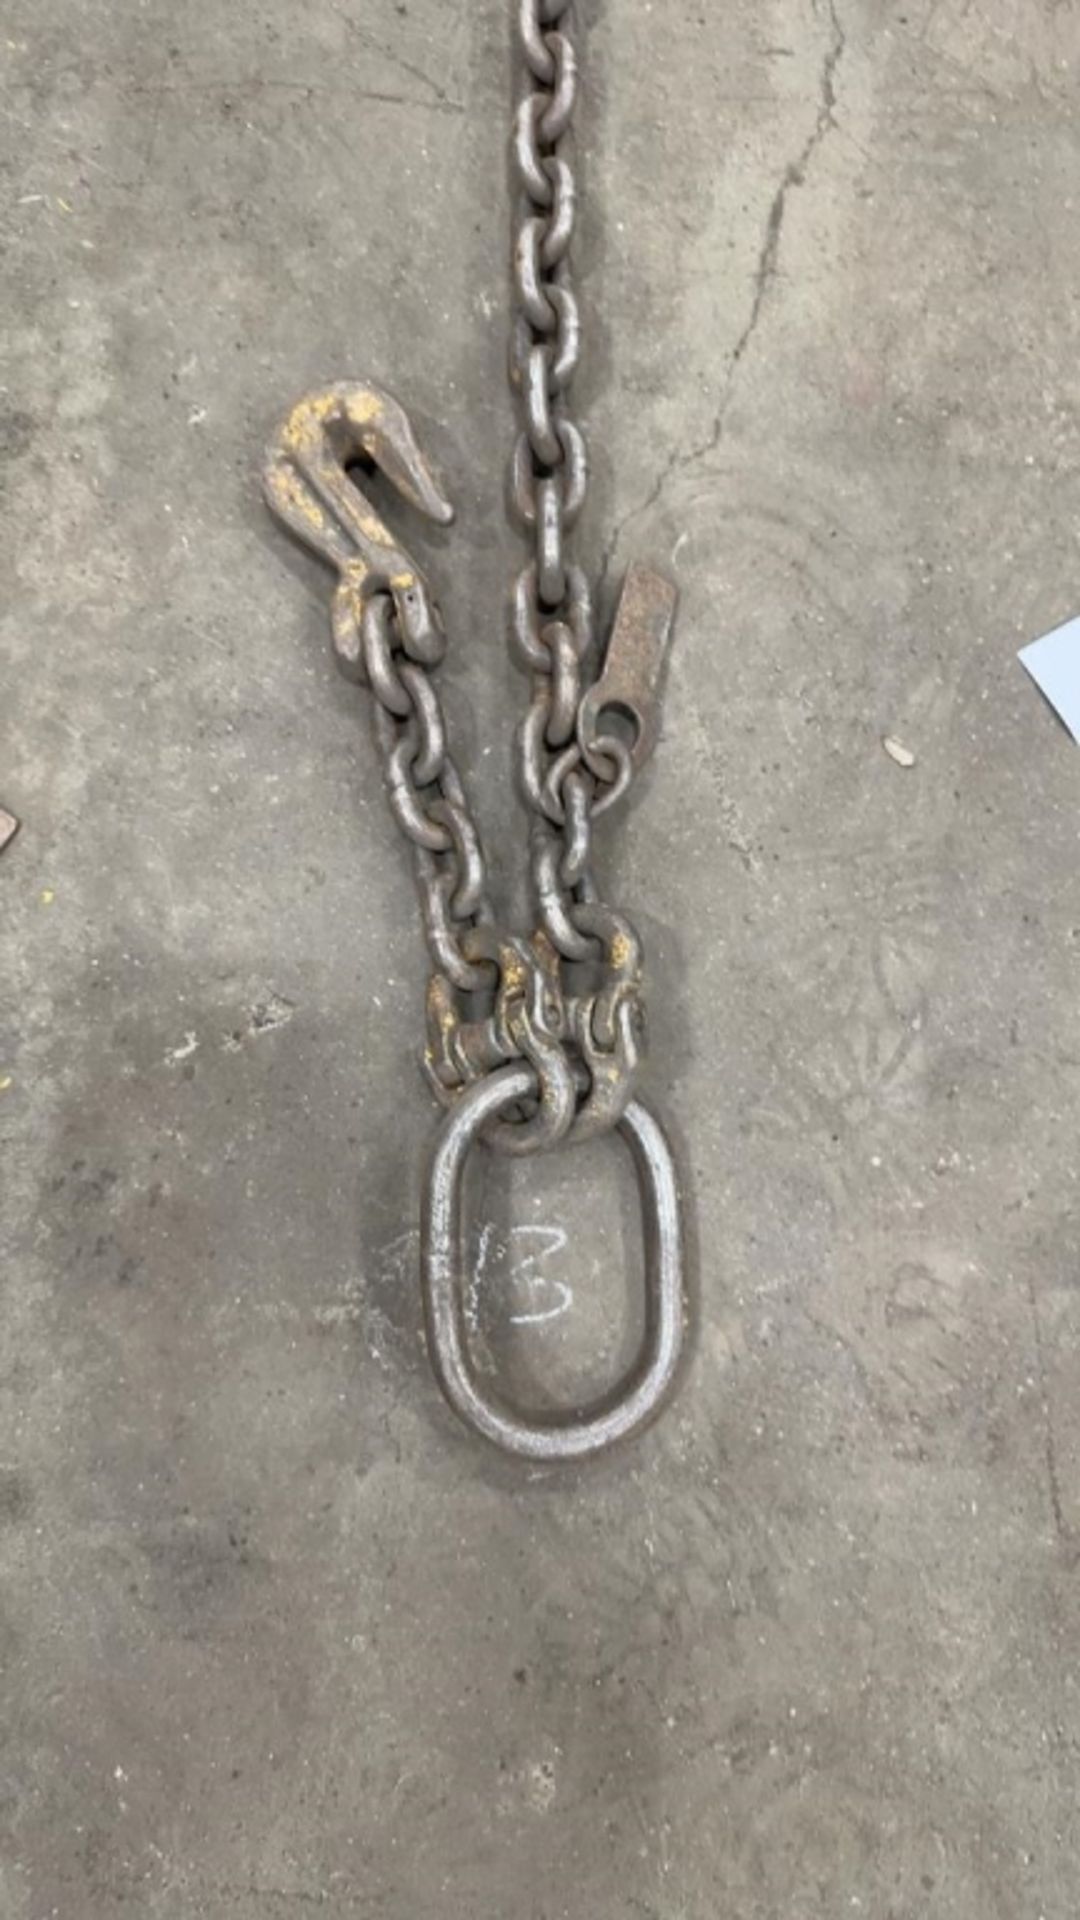 13ft Chain on Rigging Ring with Hoist Hooks - Image 4 of 6